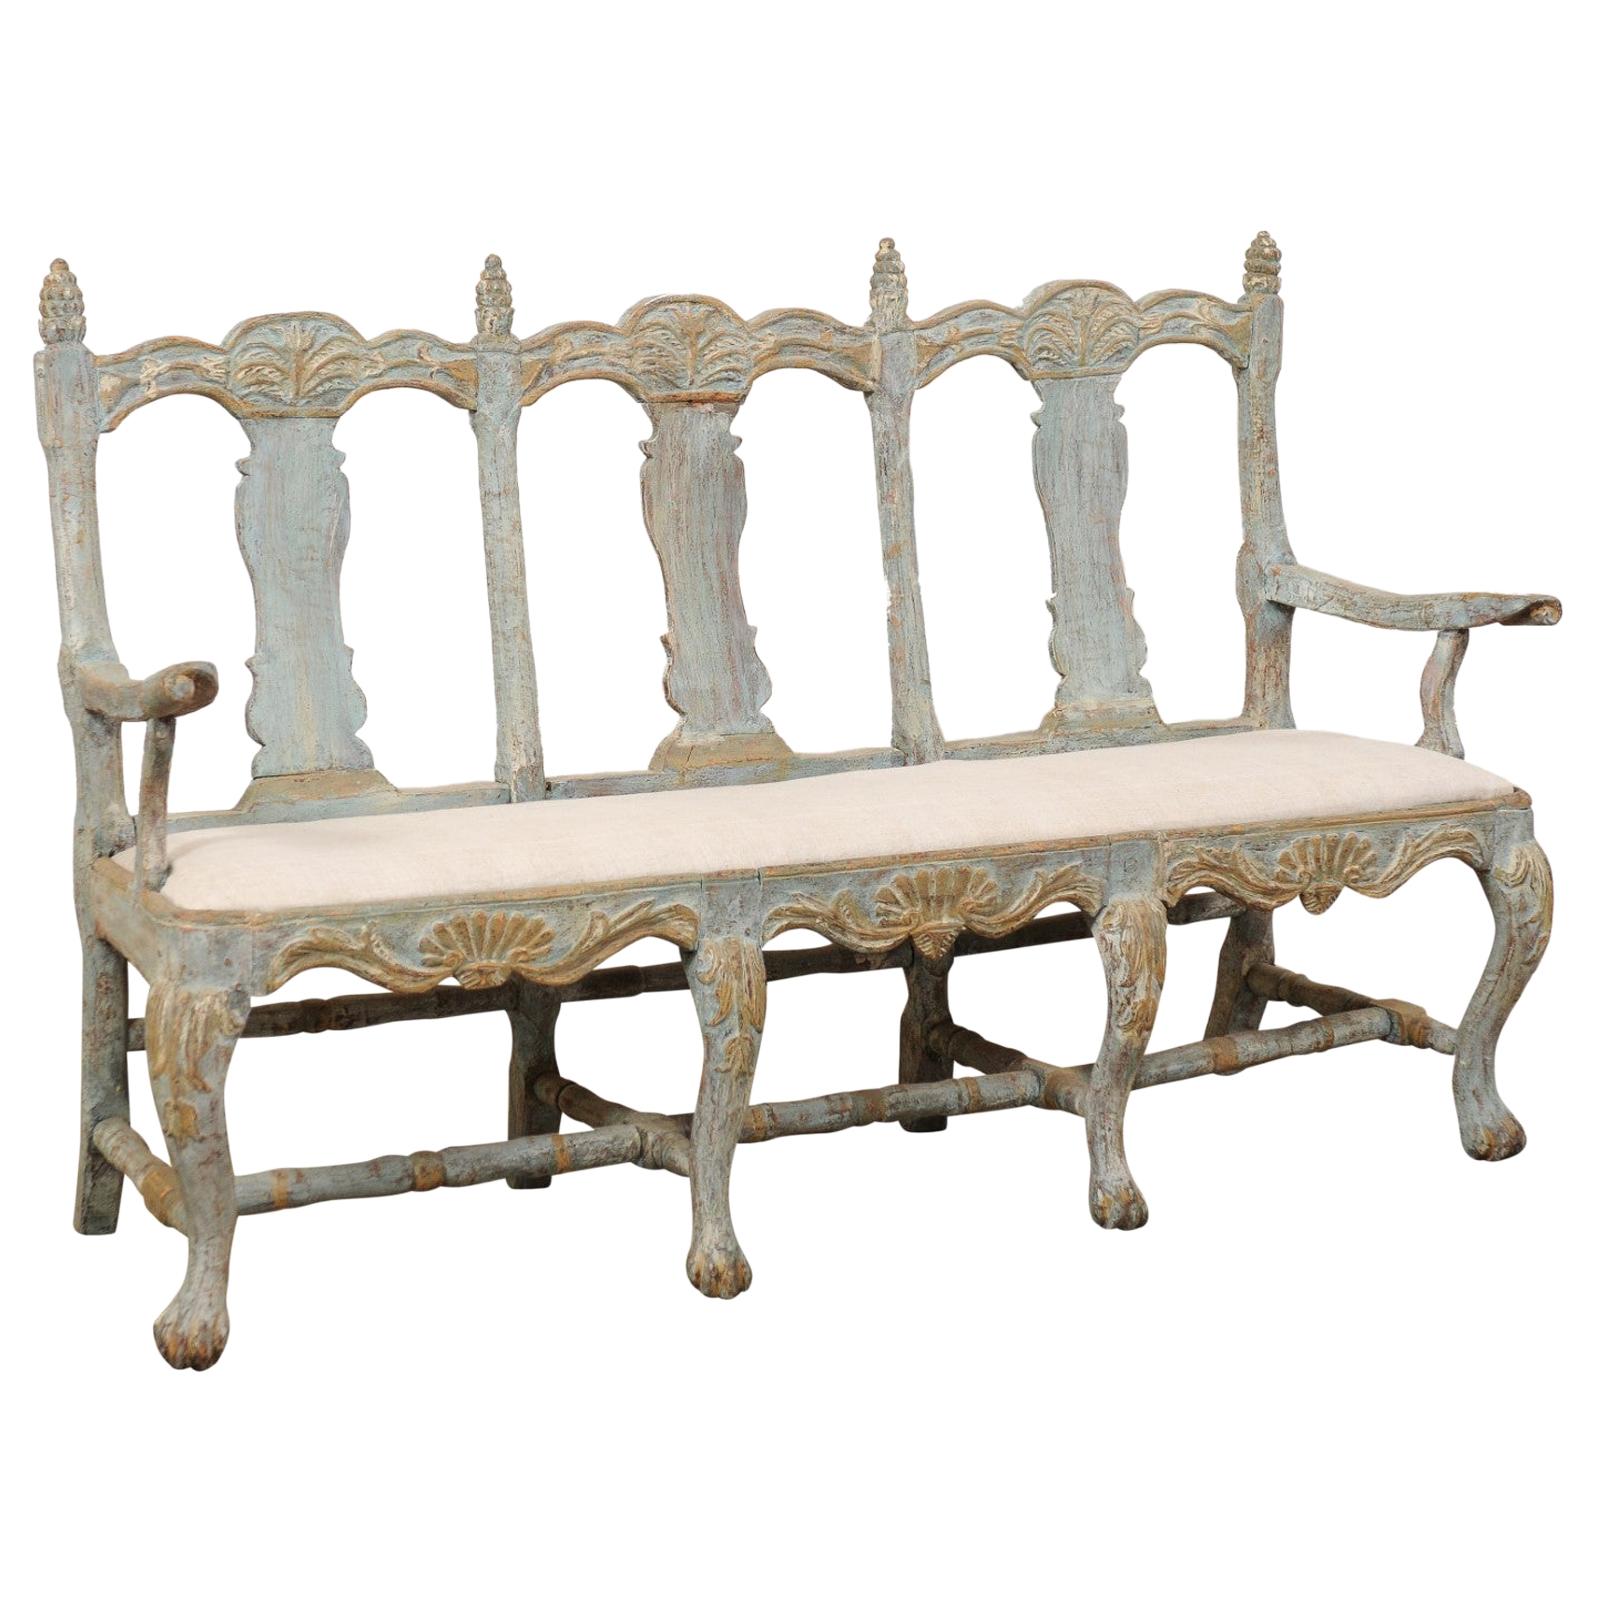 Swedish Period Baroque Carved Wood Three-Chair Back Bench with Upholstered Seat